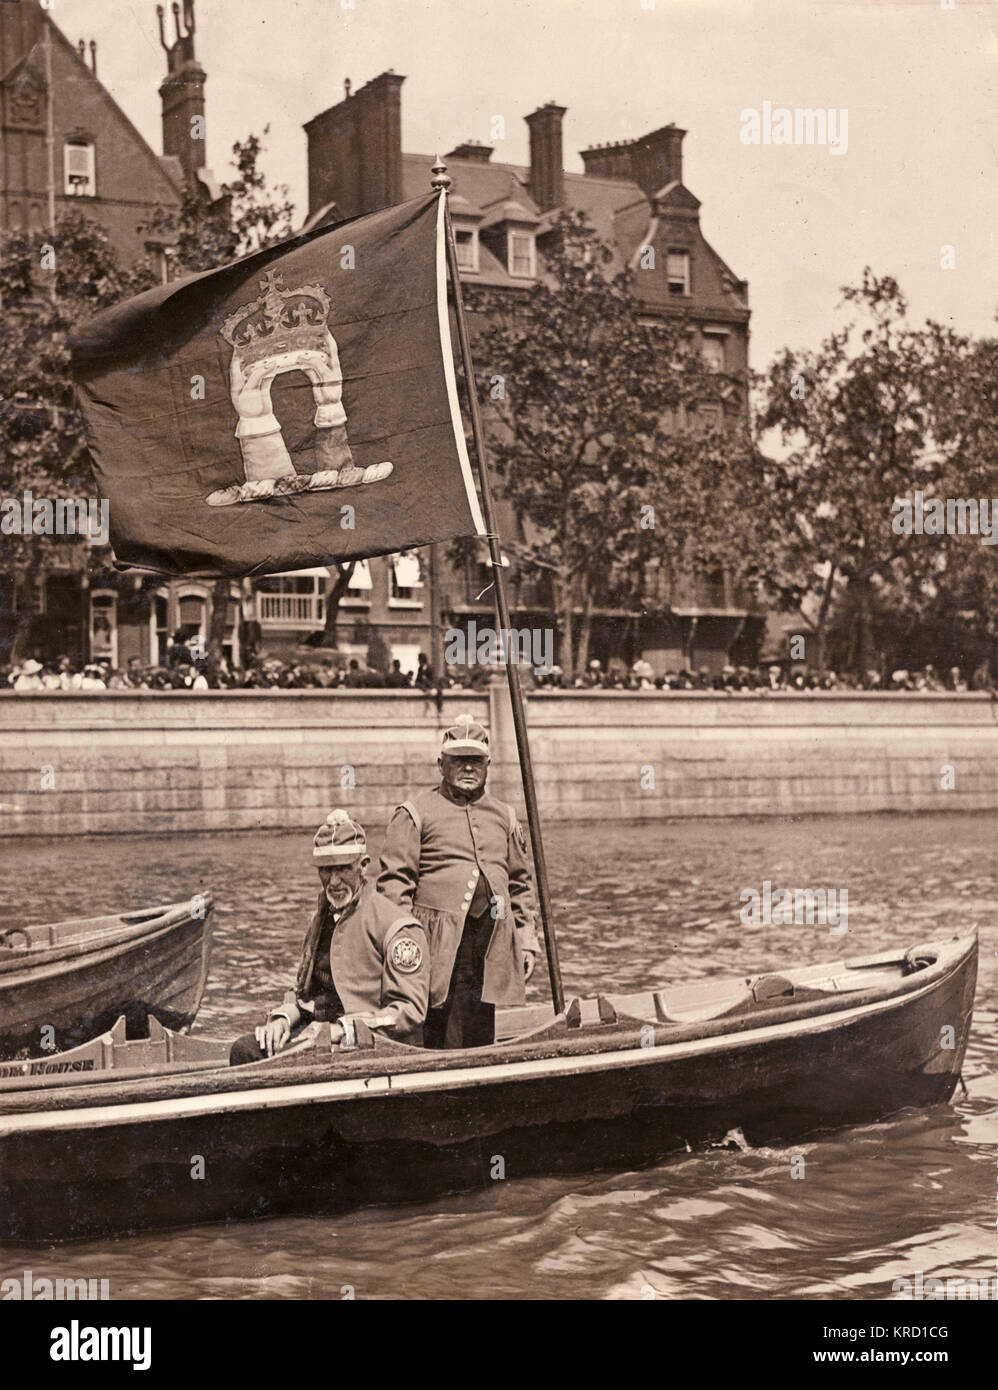 Doggett's Coat and badge Race, River Thames, Londres Banque D'Images